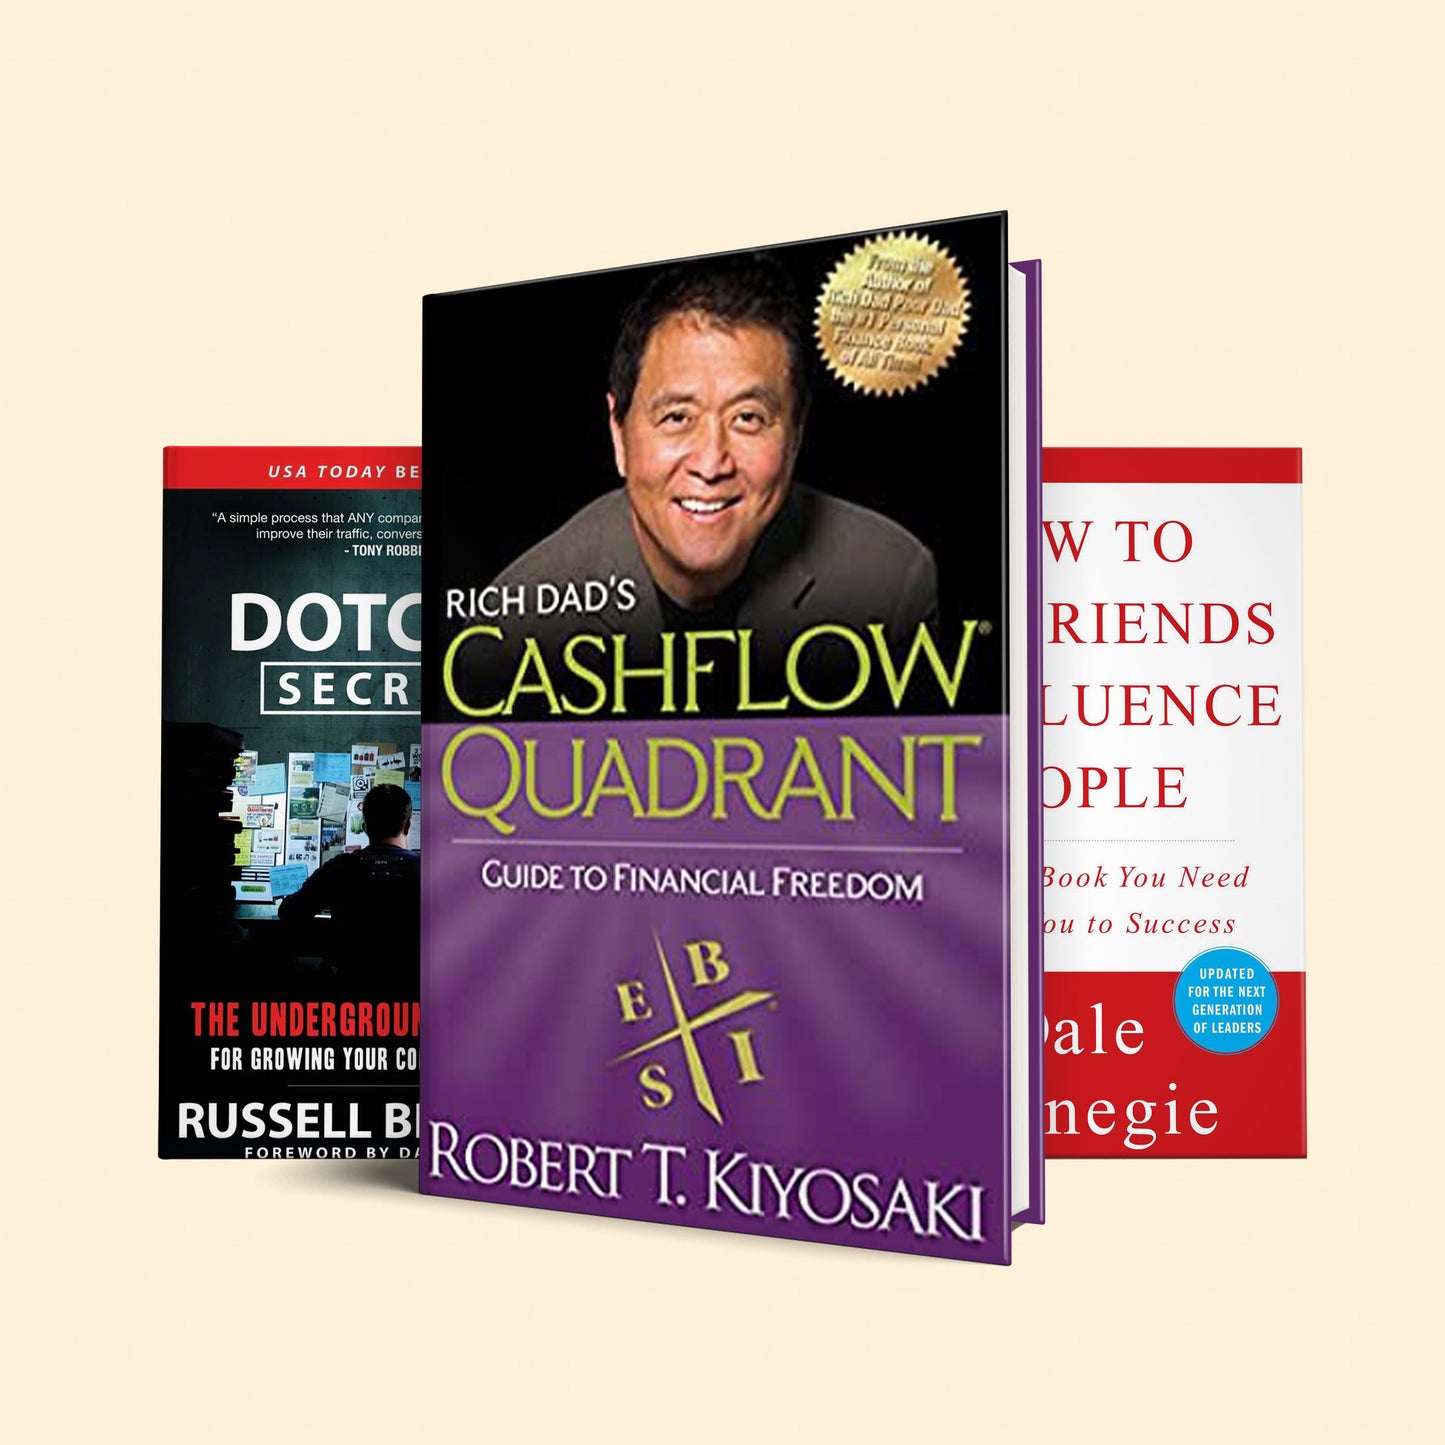 Must read books before getting into business: Quadrant cashflow, How to win friends and influnce people, Dotcom secrets